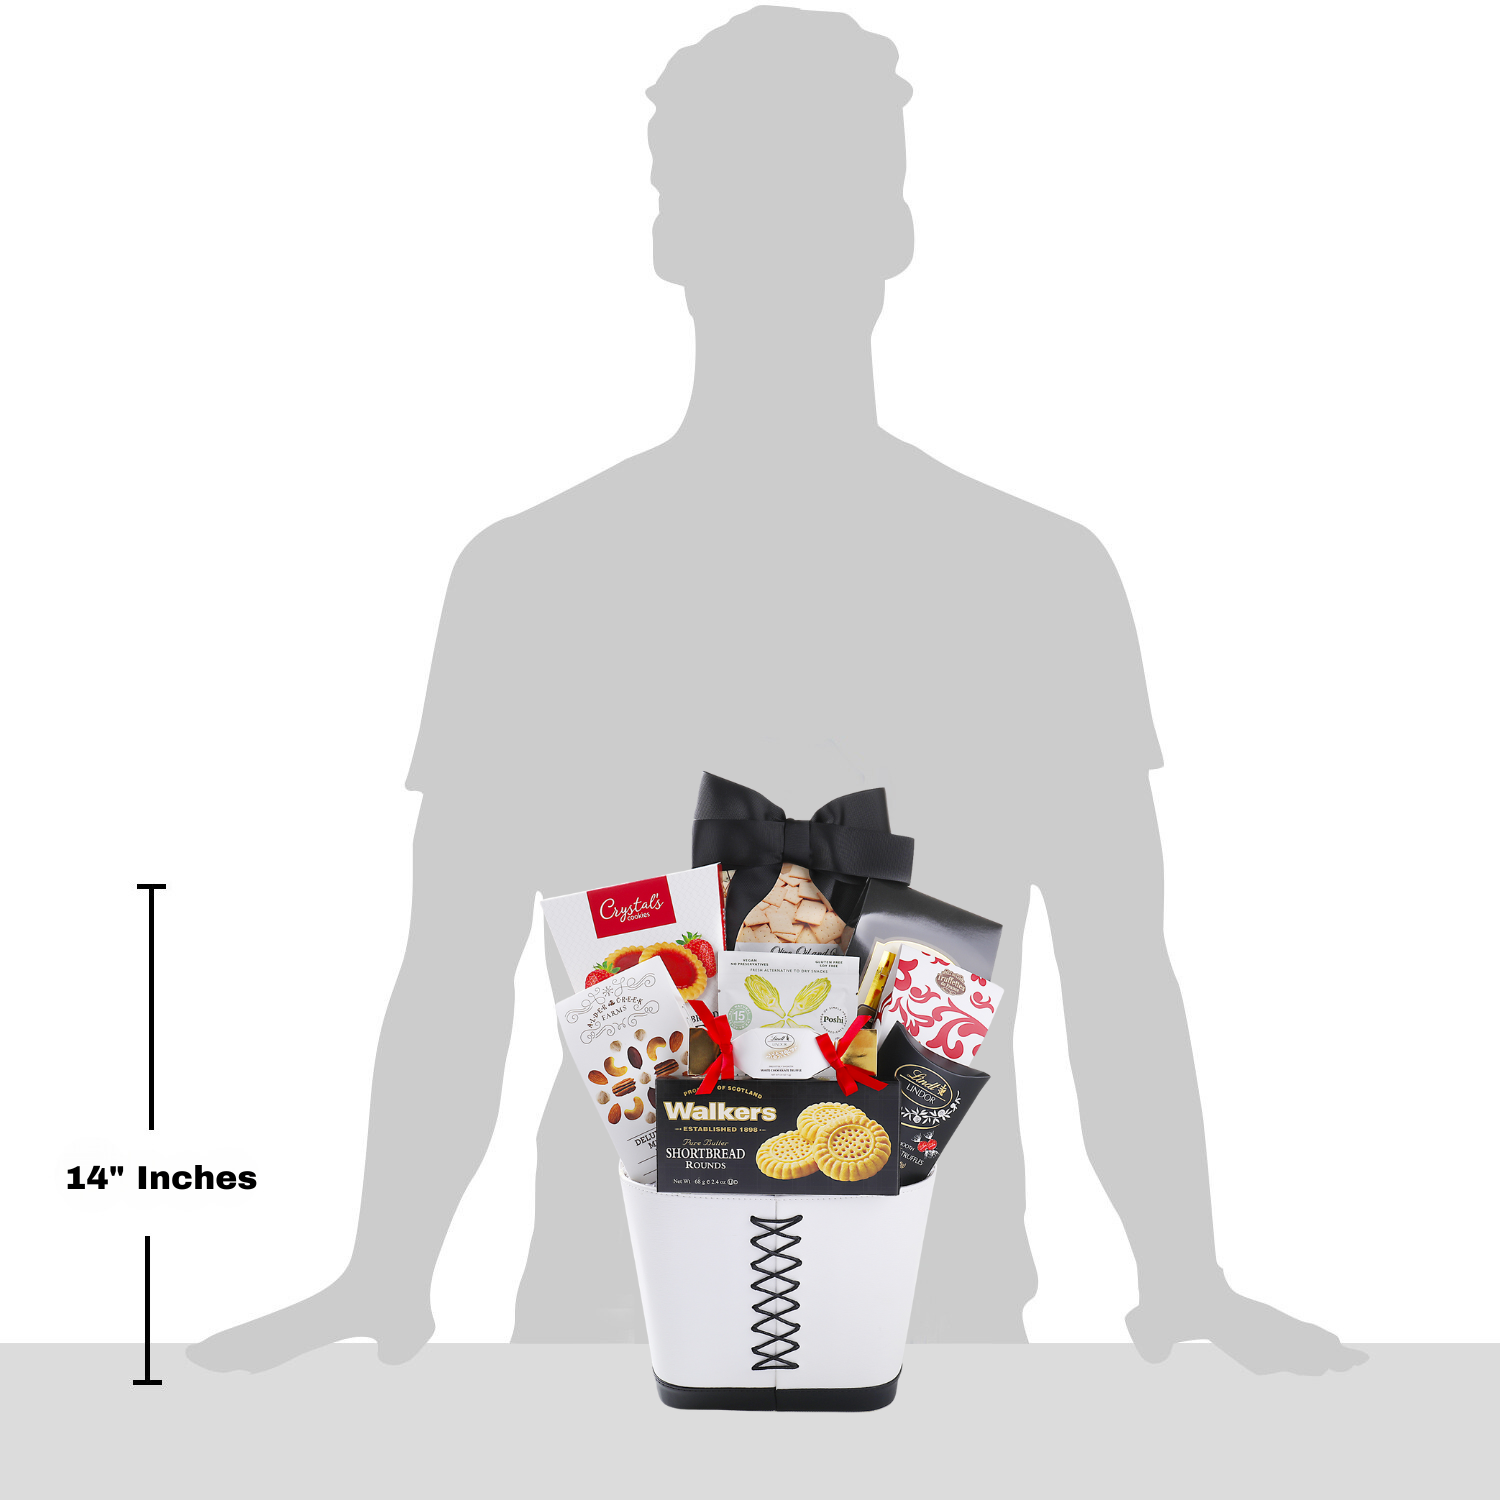 Gift over man illustration to demonstrate height.